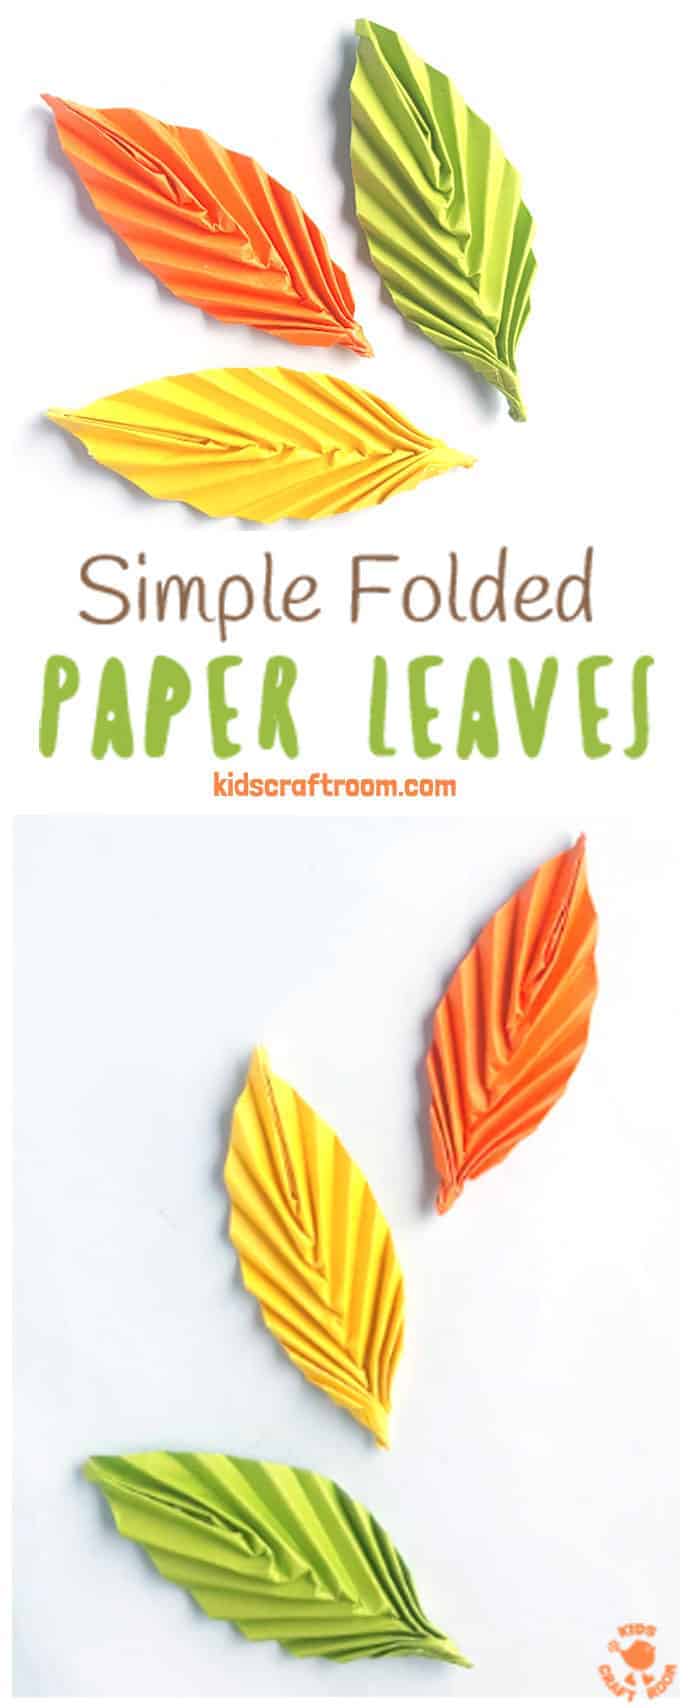 Want to know how to make Folded Paper Leaves quickly and easily? These homemade leaves are so simple and so versatile! Perfect for all sorts of art and craft projects and for homemade decor too. #leaves #leaf #paperleaves #origami #origamileaves #papercrafts #Falldecor #Fallcrafts #Autumn #Autumncrafts